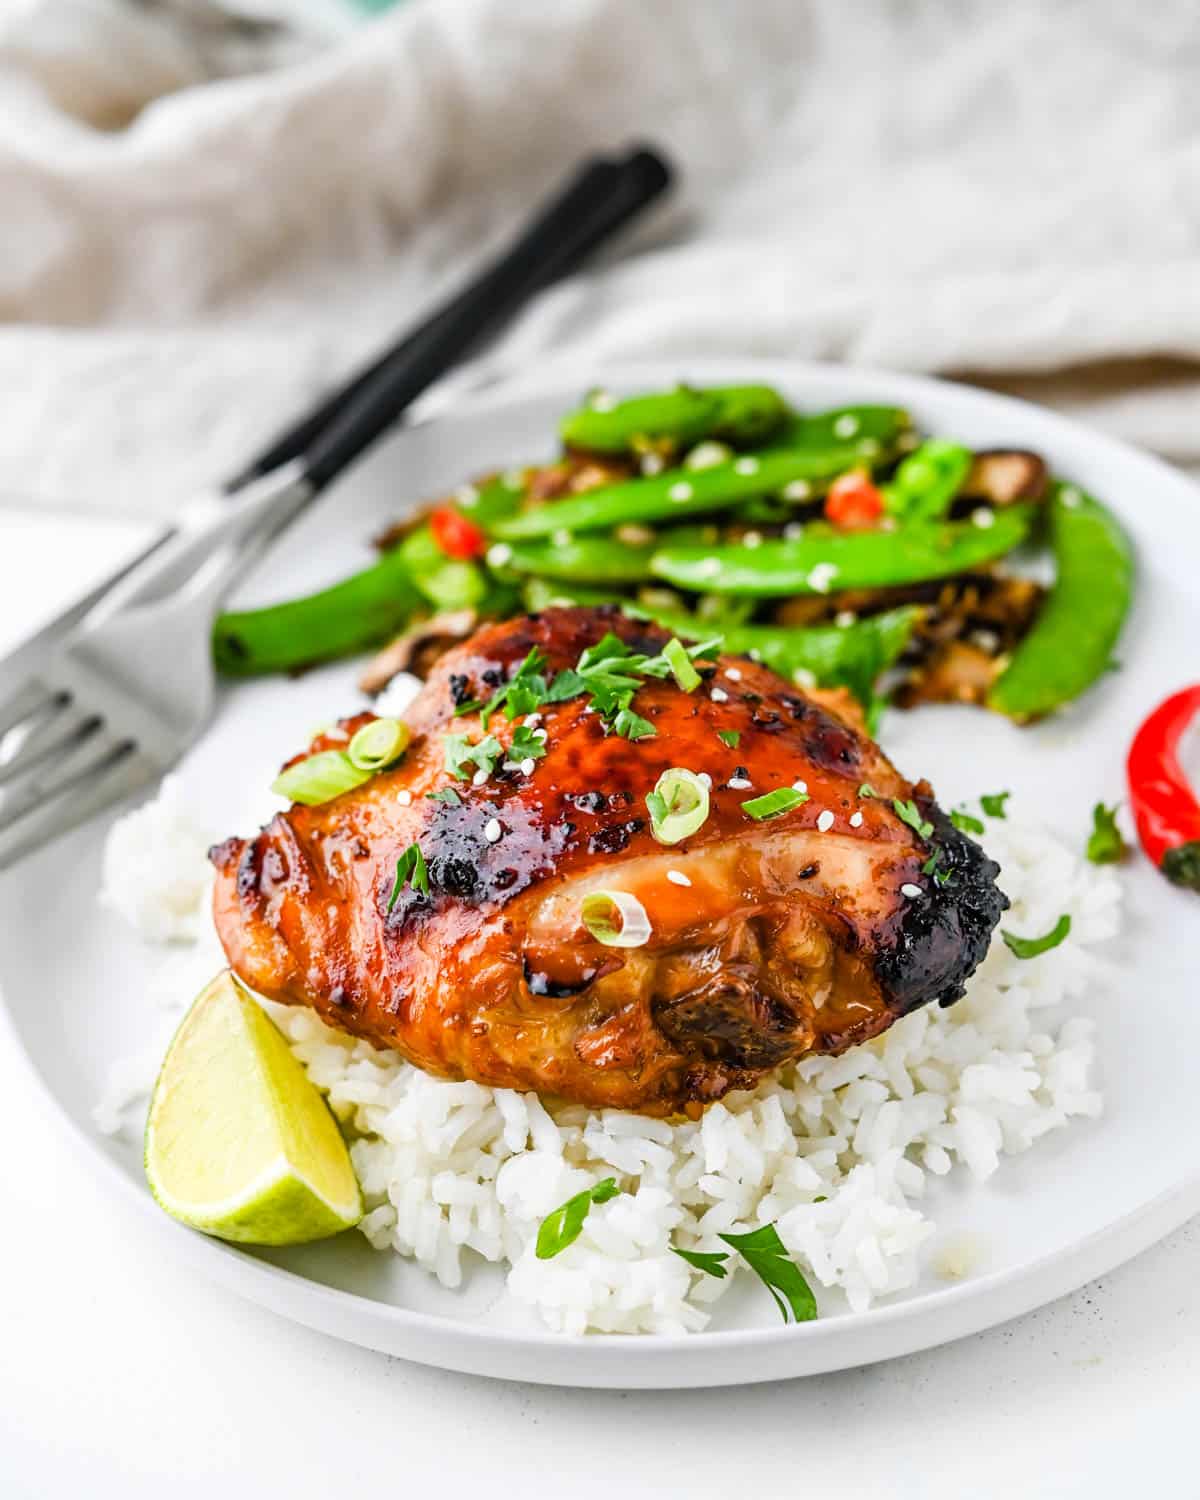 A juicy baked chicken thigh served with rice and snap peas.